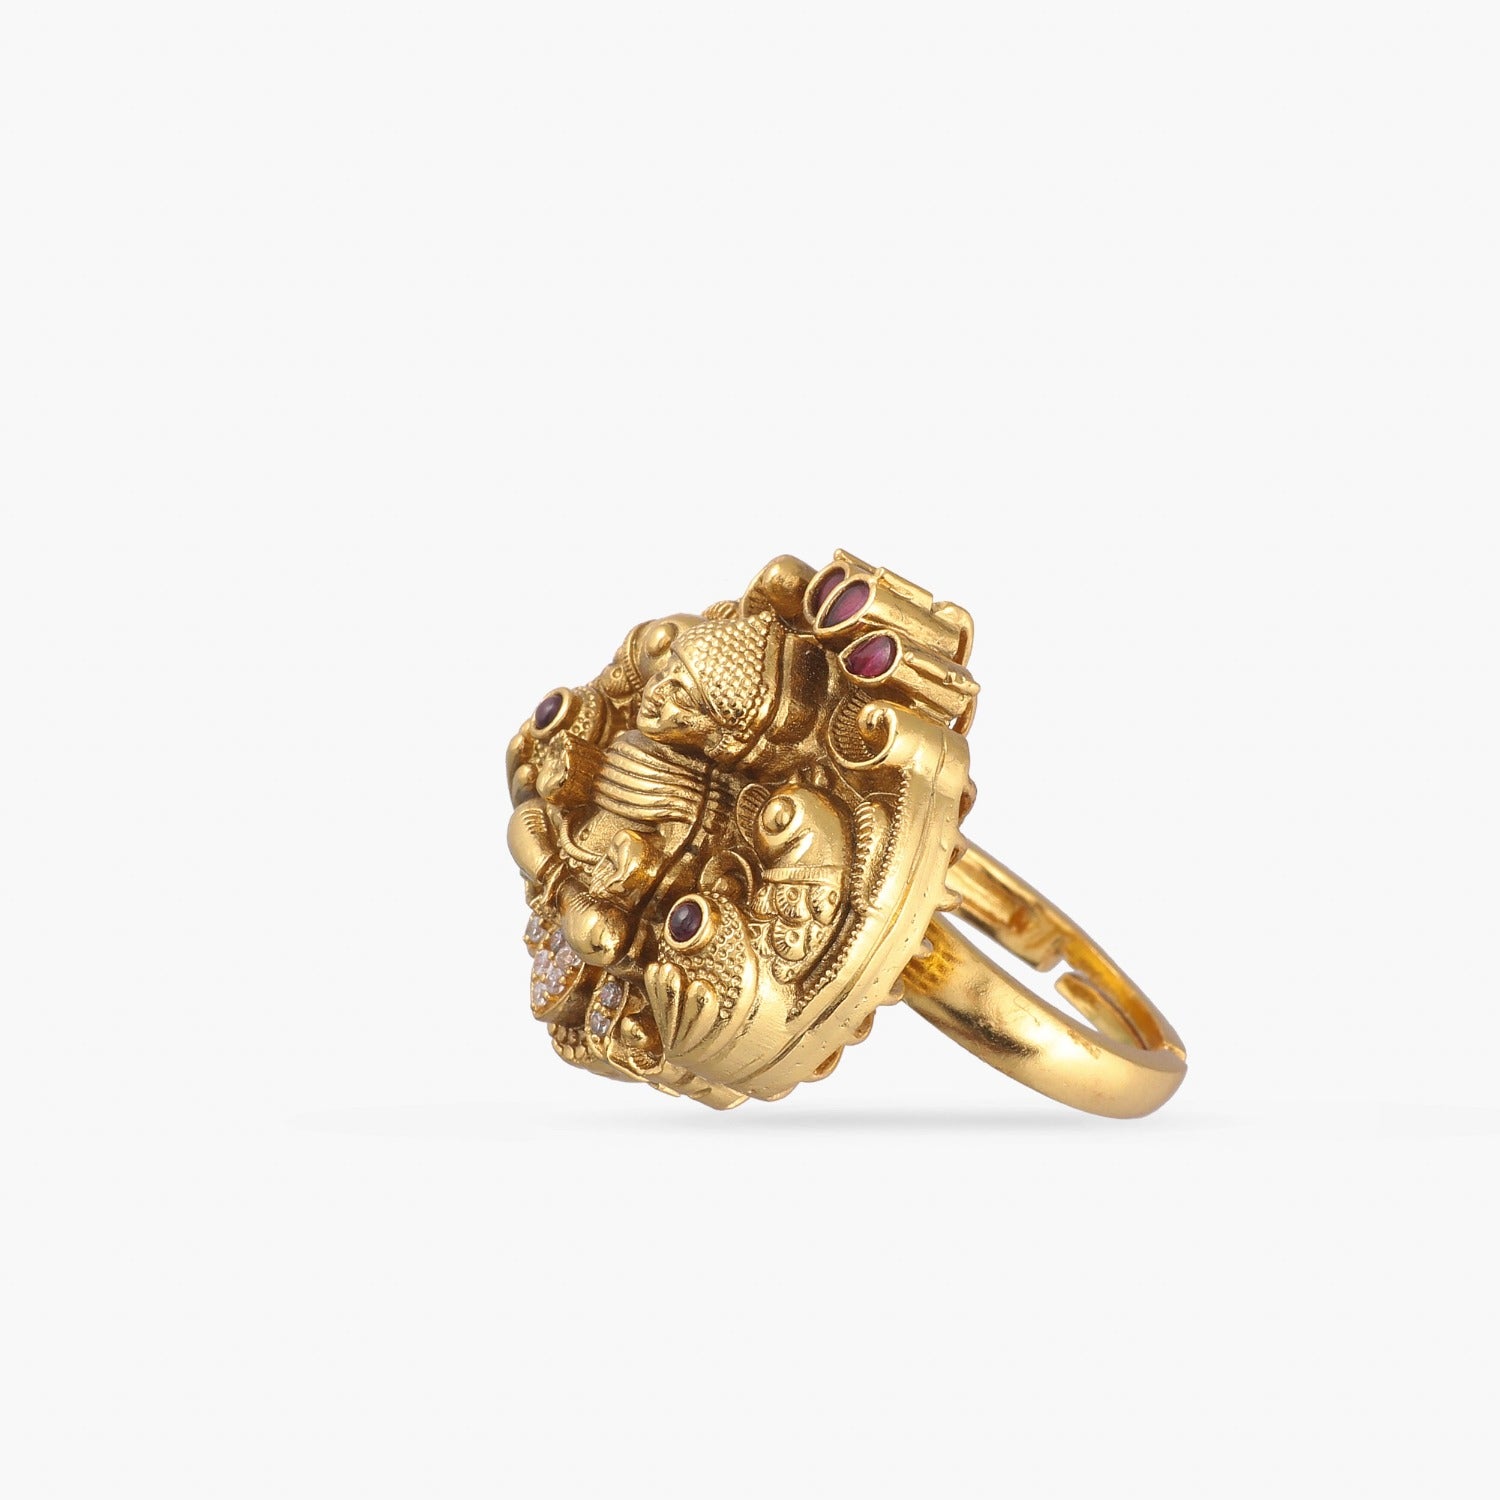 Antique Gold Temple Finger Ring with Adjustable Design at a Budget-Friendly  Price F26247